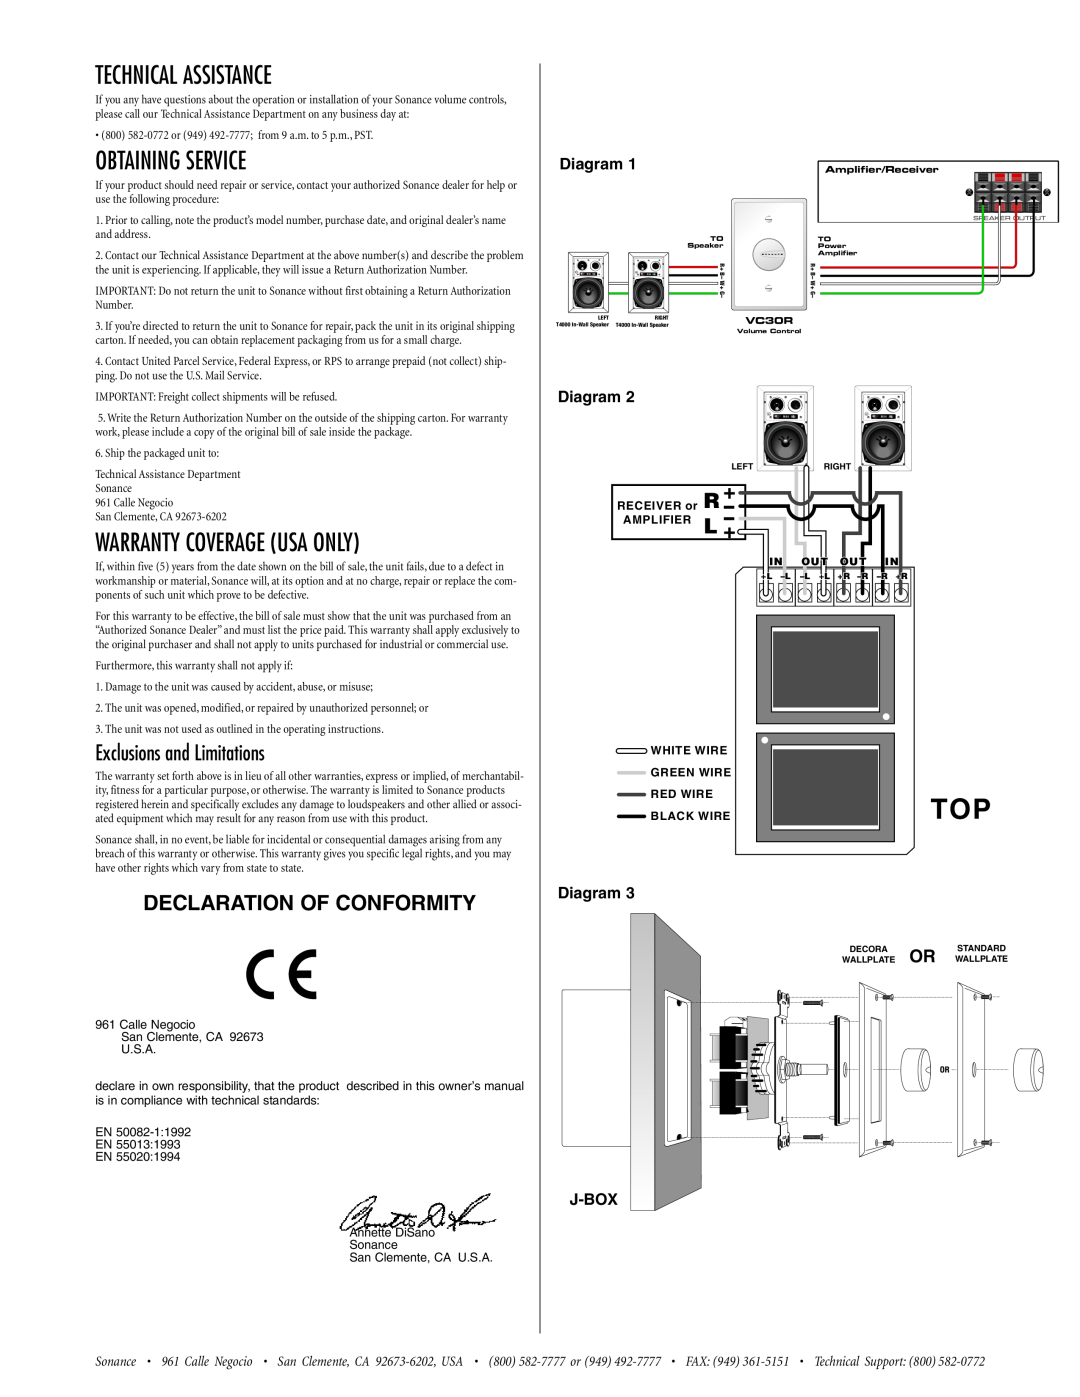 Sonance VC30R Technical Assistance, Obtaining Service, Warranty Coverage Usa Only, Exclusions and Limitations, Diagram 